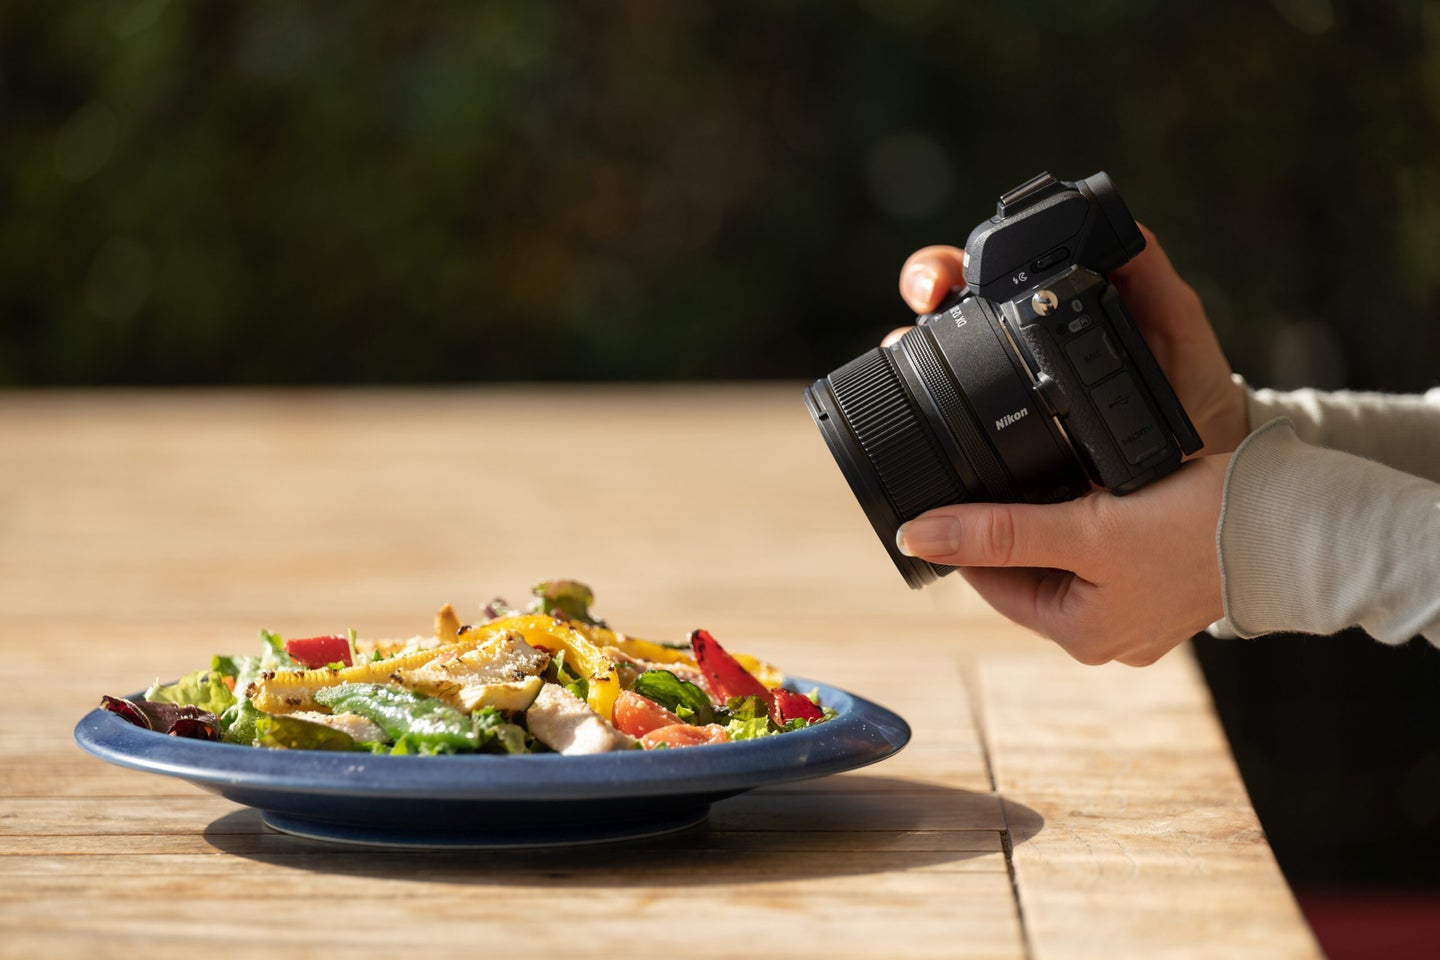 The NIKKOR Z DX 12-28mm f/3.5-6.5 PZ VR on a Nikon camera being held to photograph food